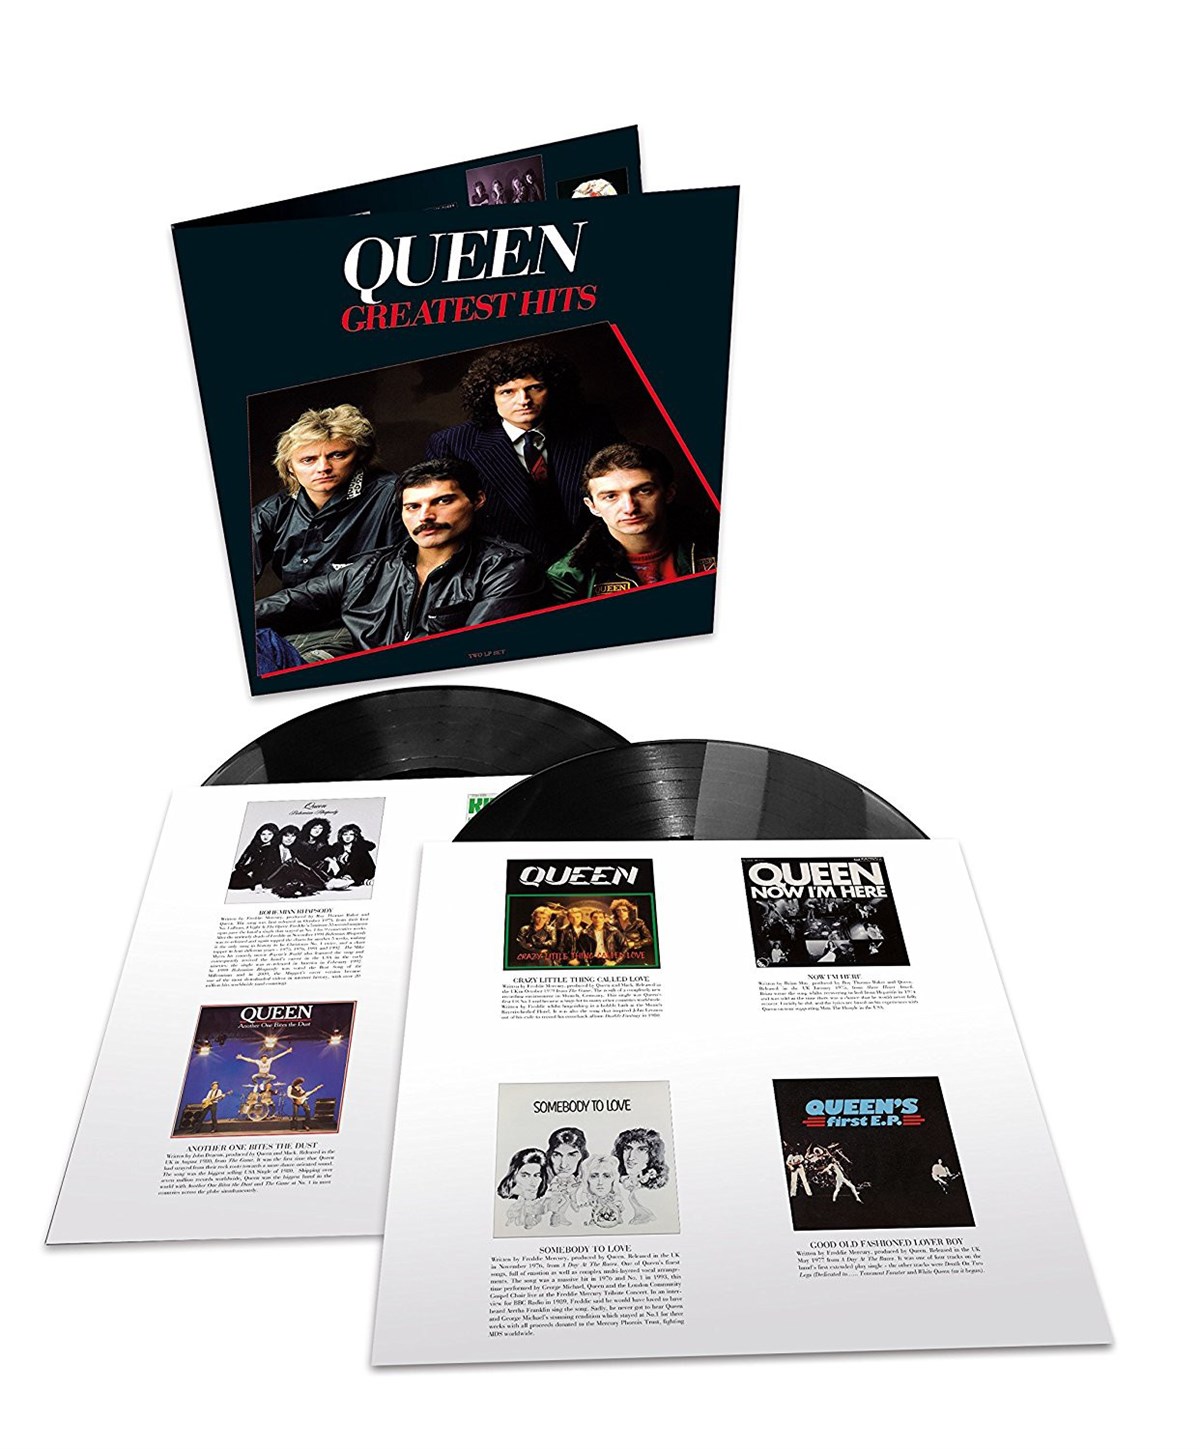 Queen - Greatest Hits (Vinile) - Discomania Mix